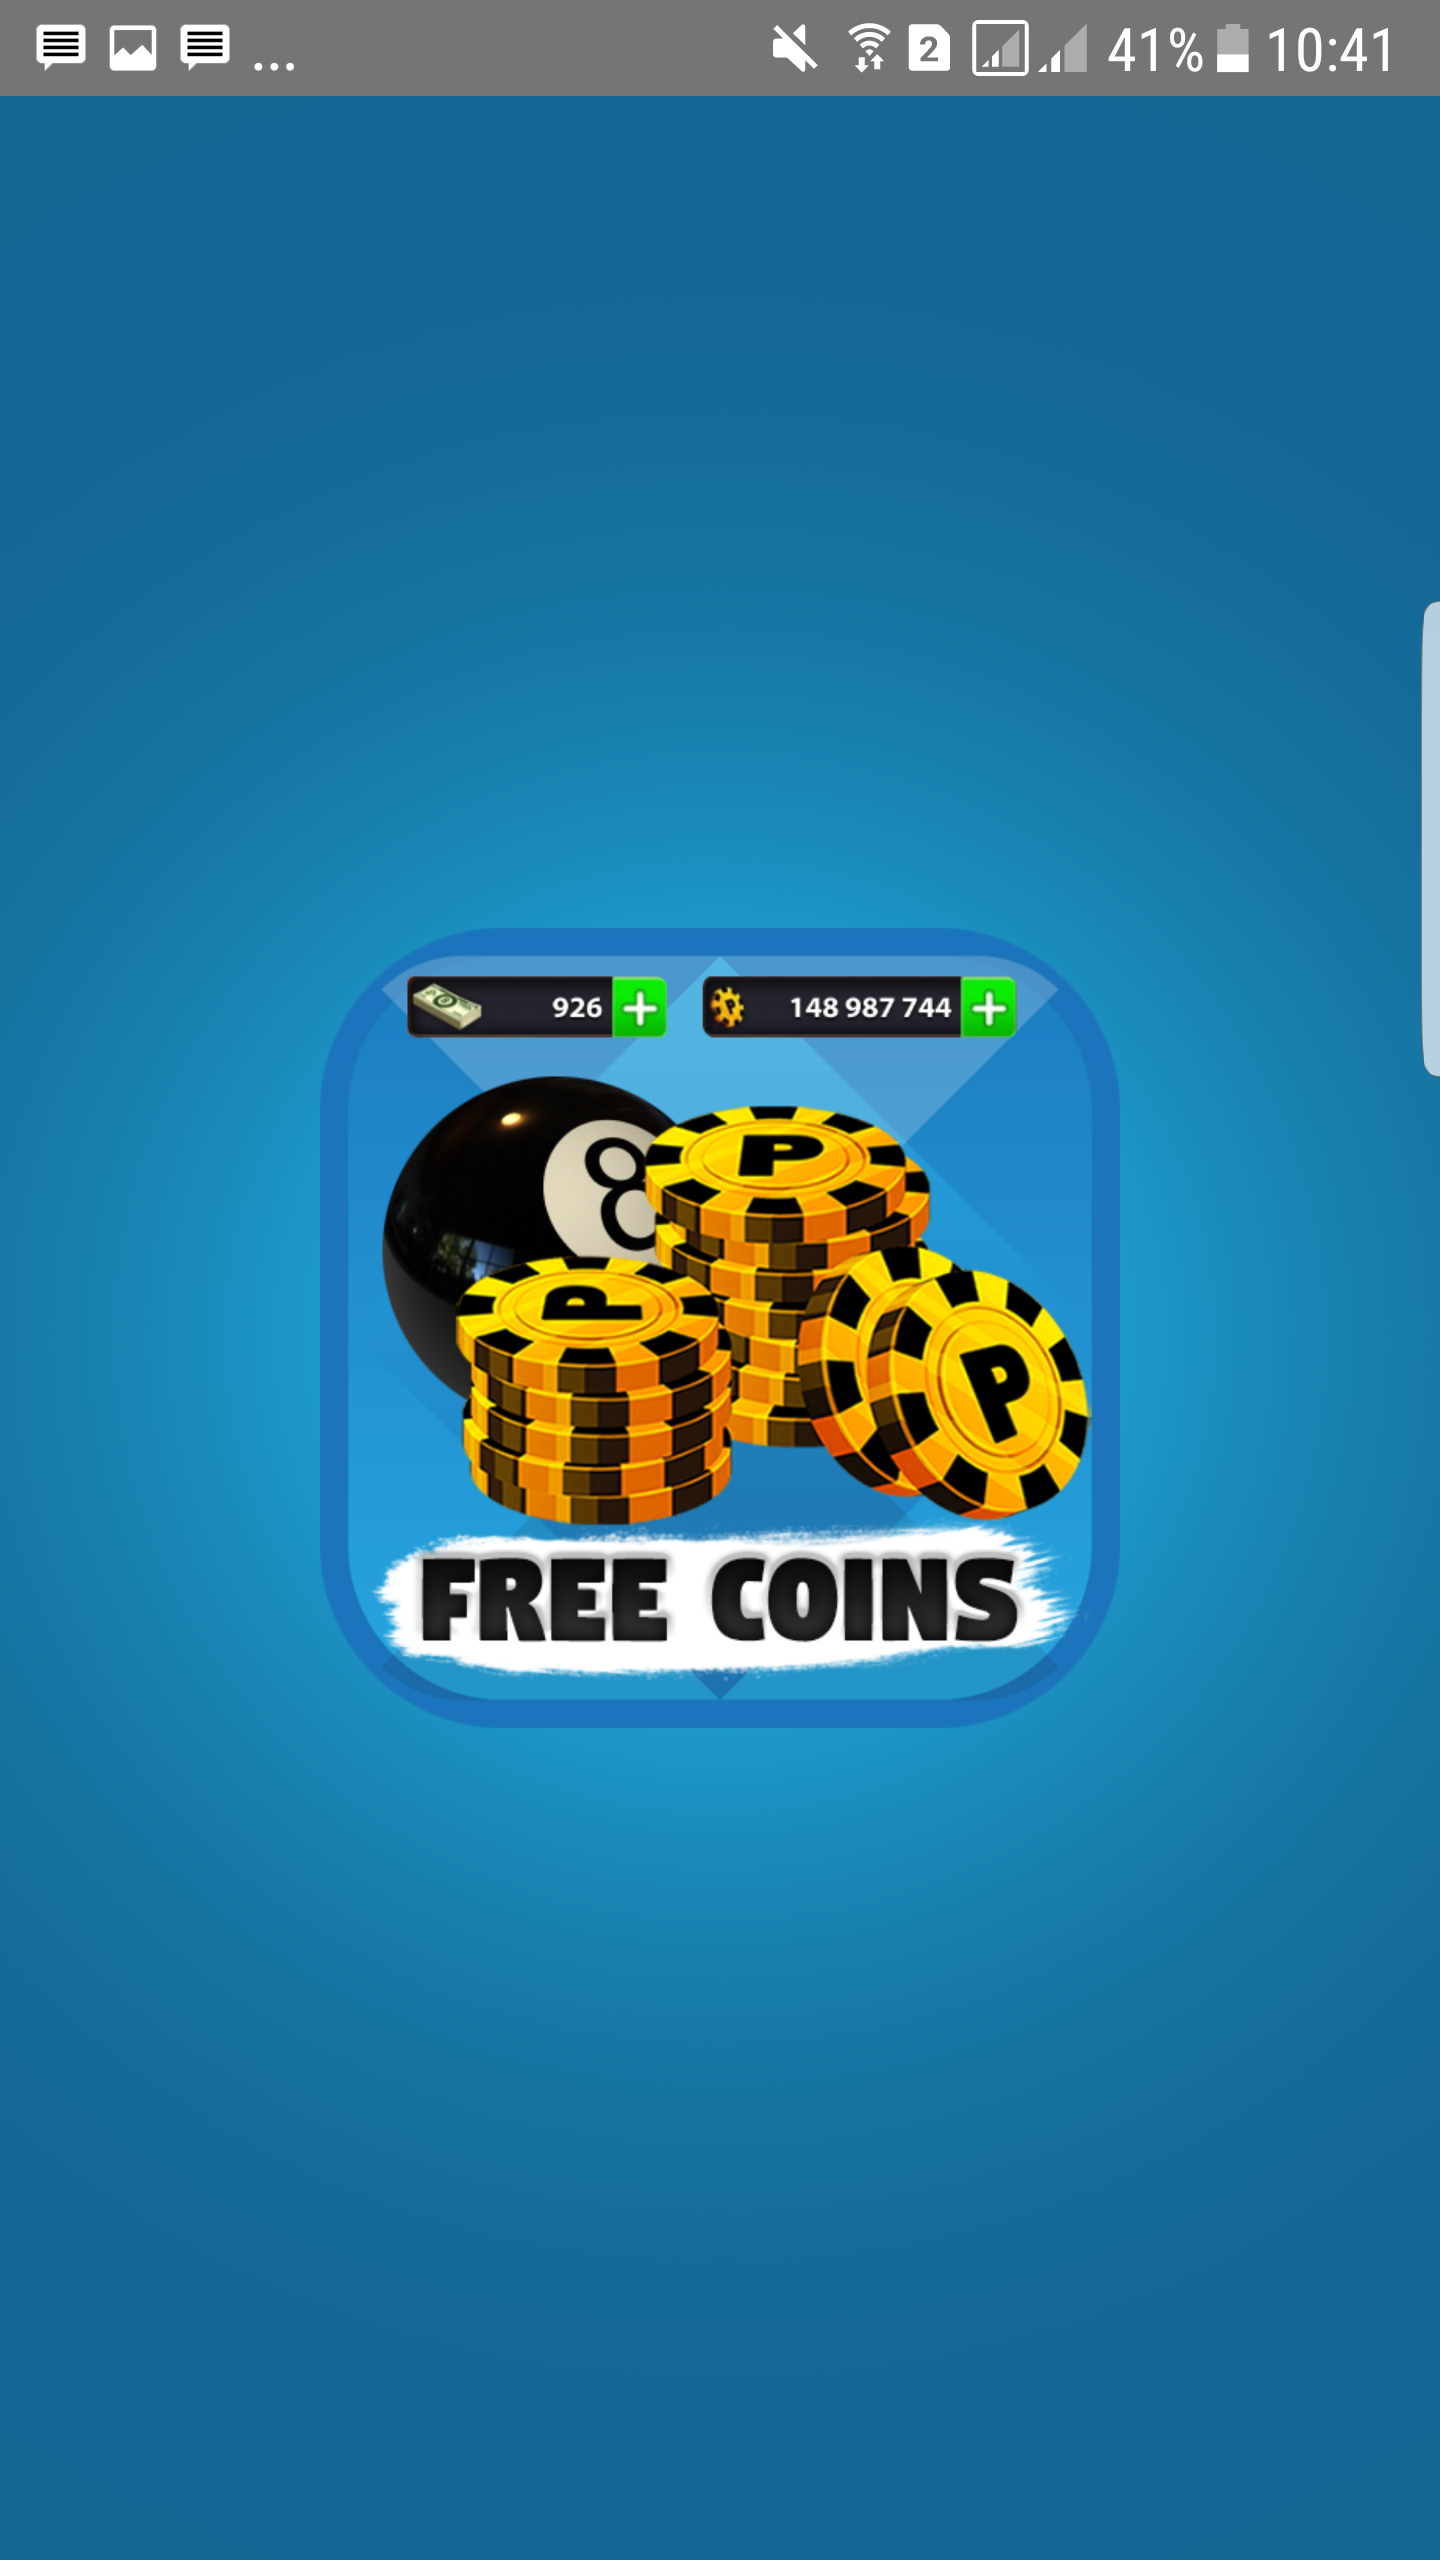 8 Ball Pool Rewards Millions for Android - APK Download - 